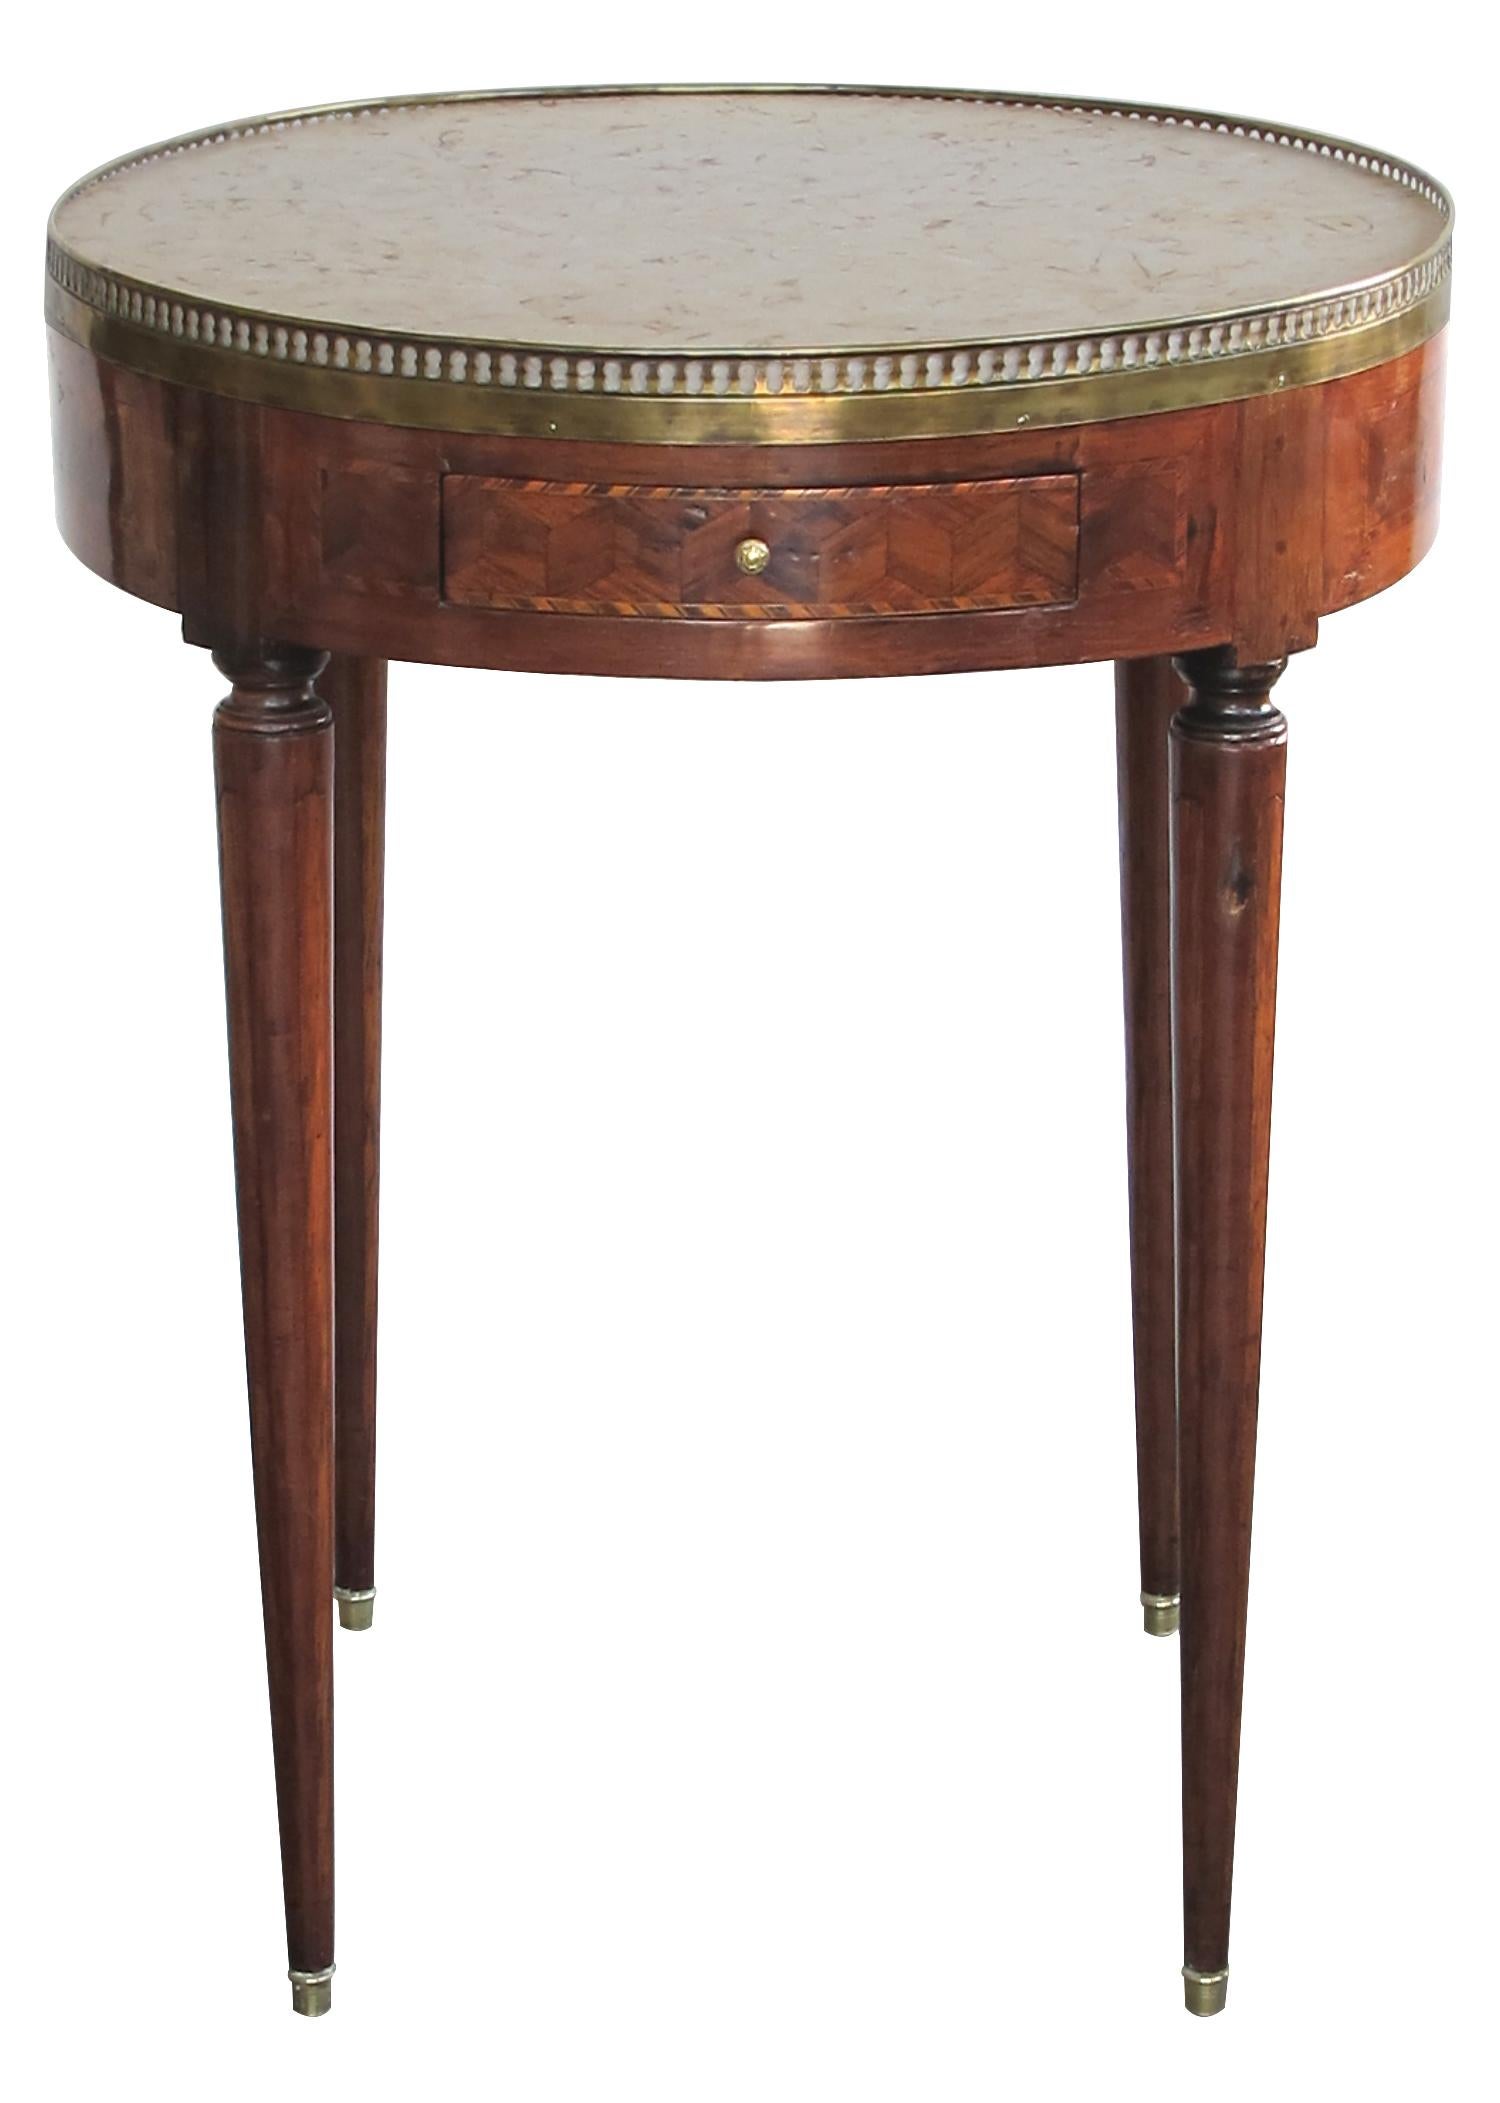 Kingwood Elegant French Directoire Circular Bouillotte Table with Fossilized Marble Top